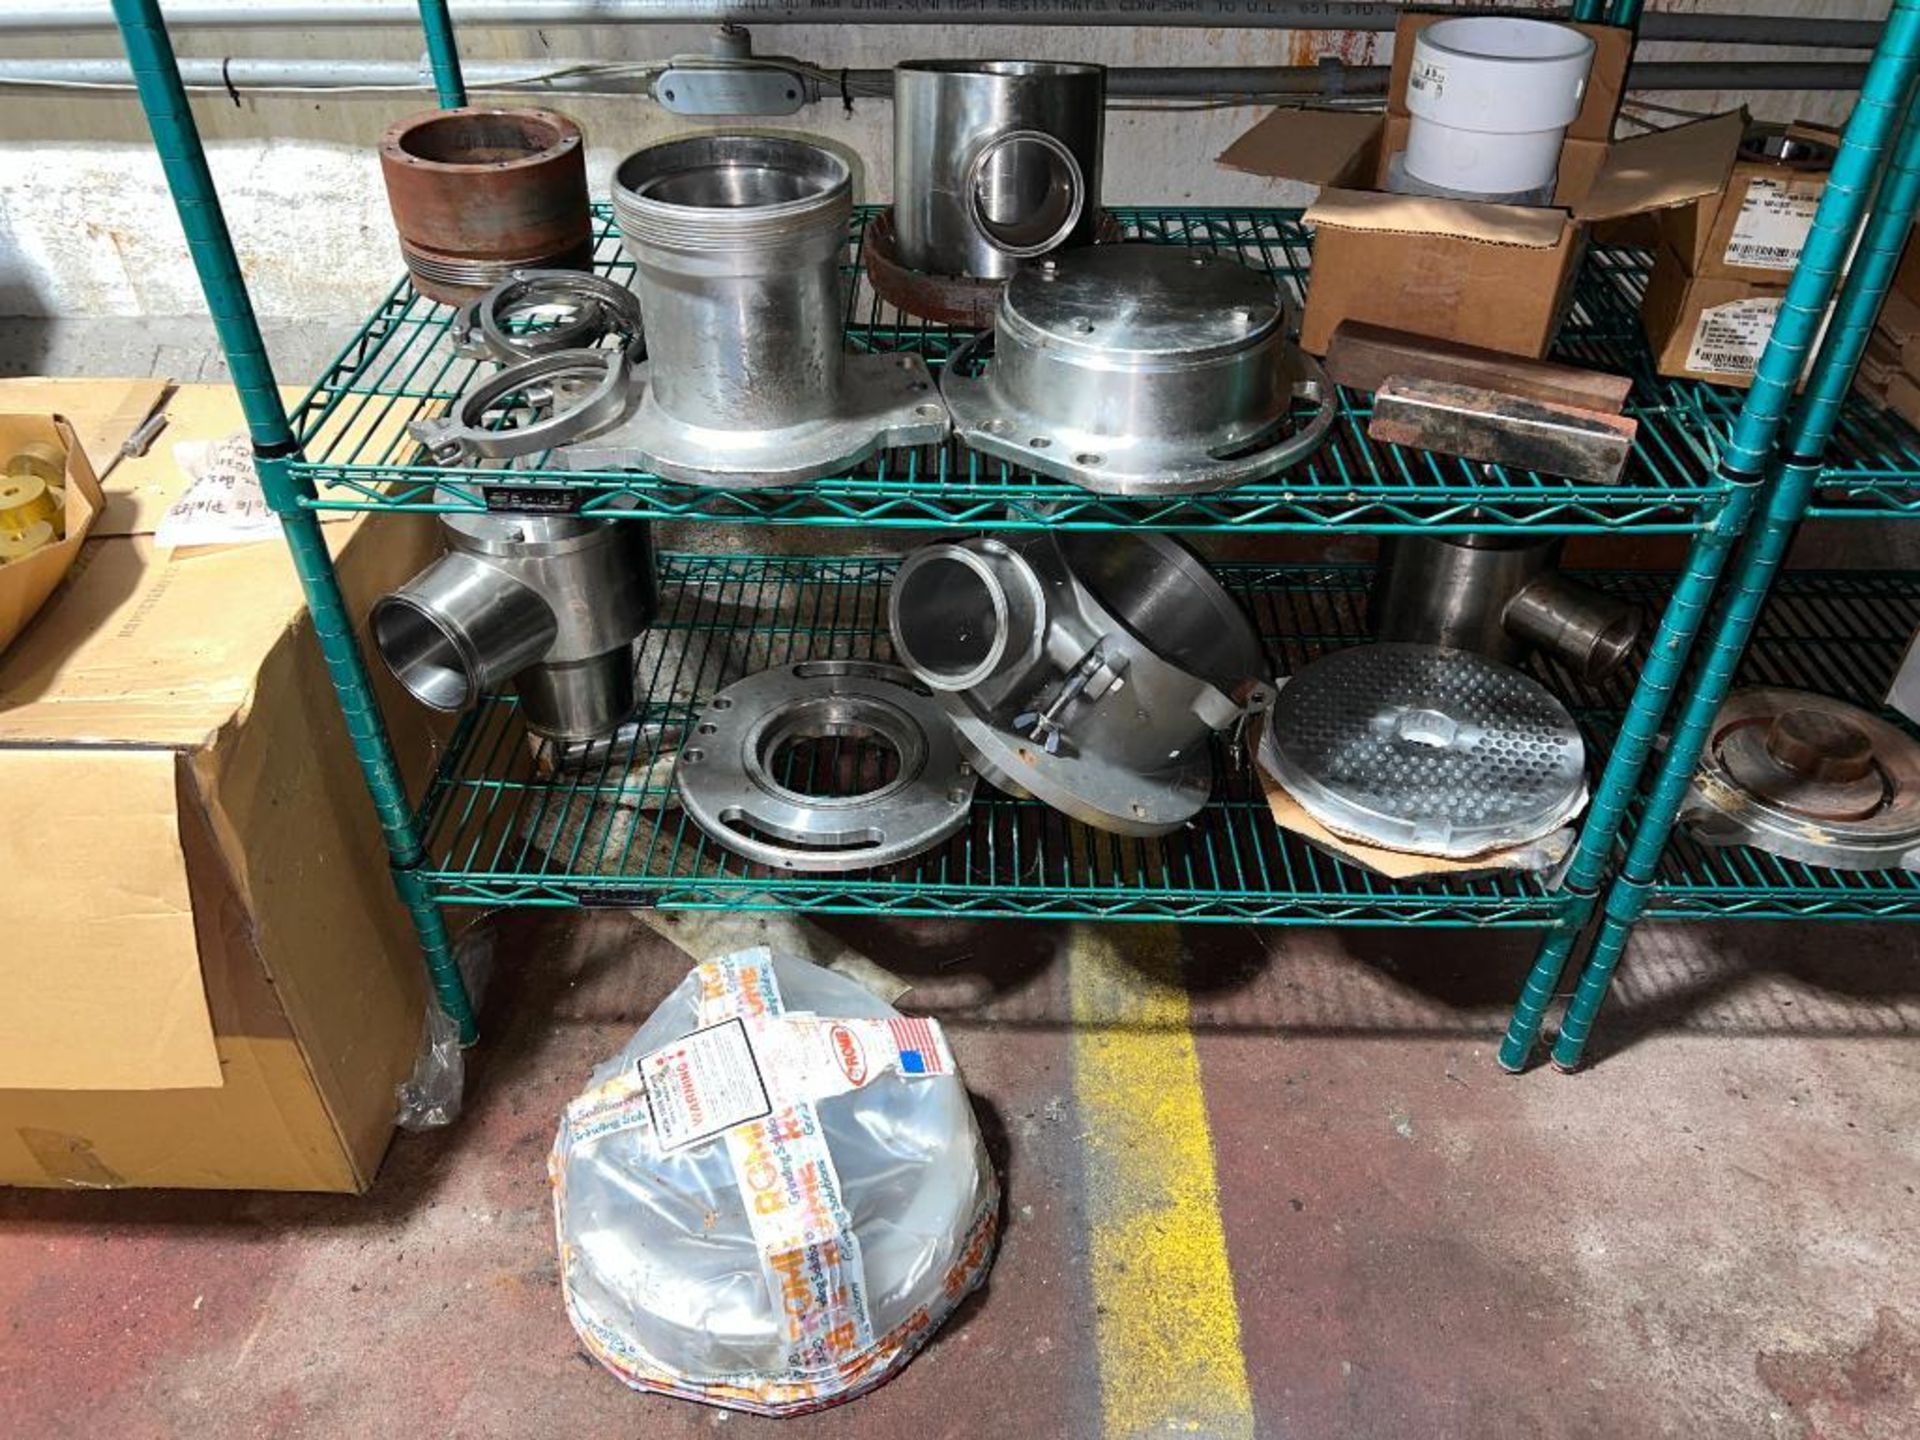 Grinder Plate, Feed Screw, Hardware and Shelves - Rigging Fee: $350 - Image 3 of 7